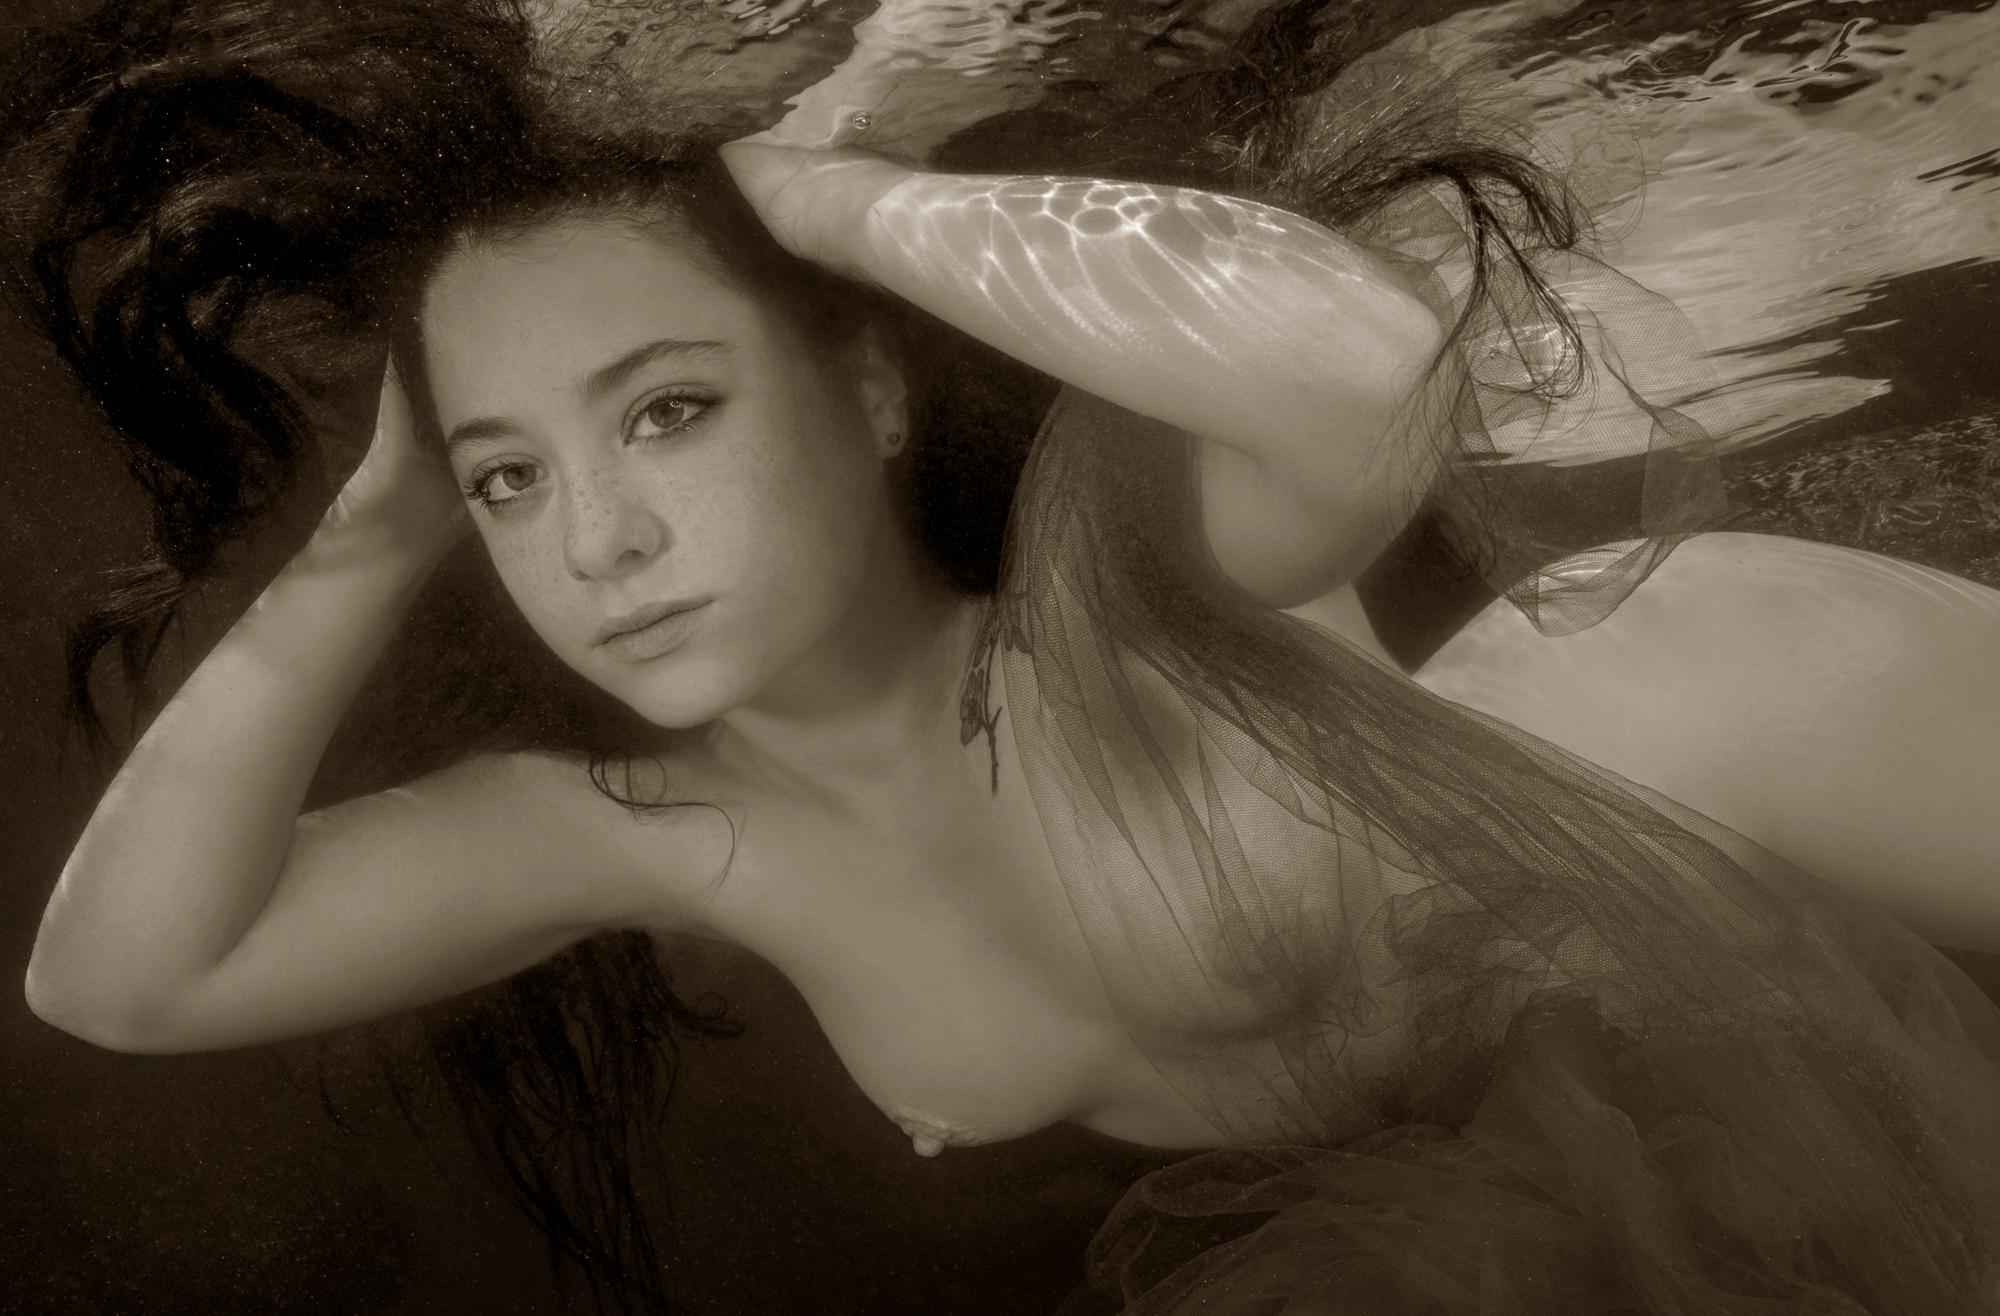 Alex Sher Nude Photograph - Little Mermaid - underwater nude photograph - archival pigment print